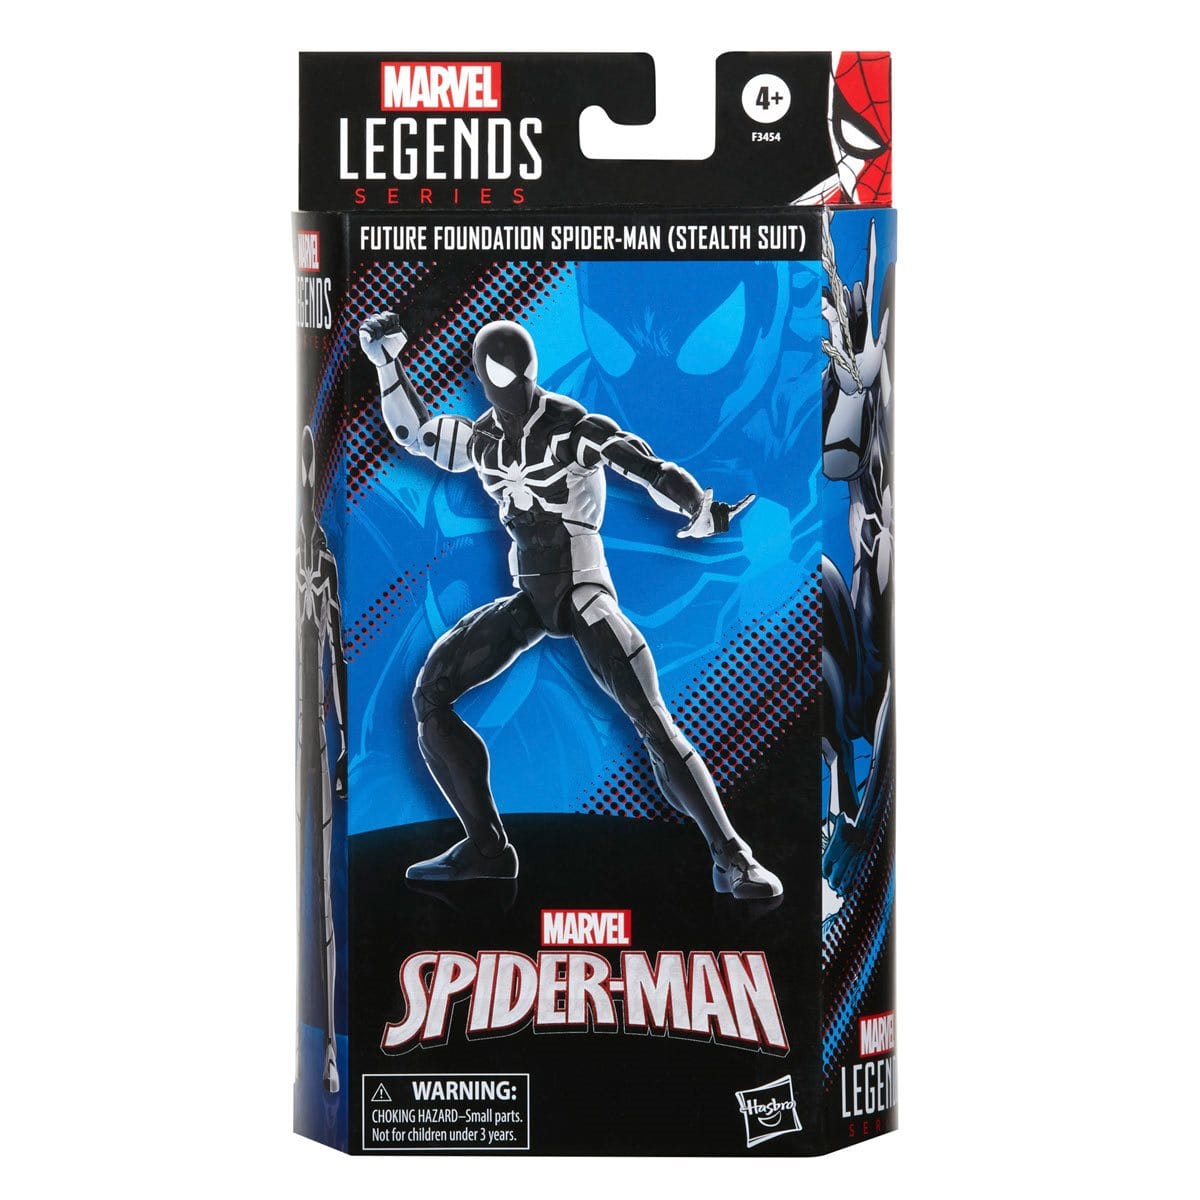 Future Foundation Spider-Man Stealth Suit Hasbro Marvel Legends Series Action Figure Media box front